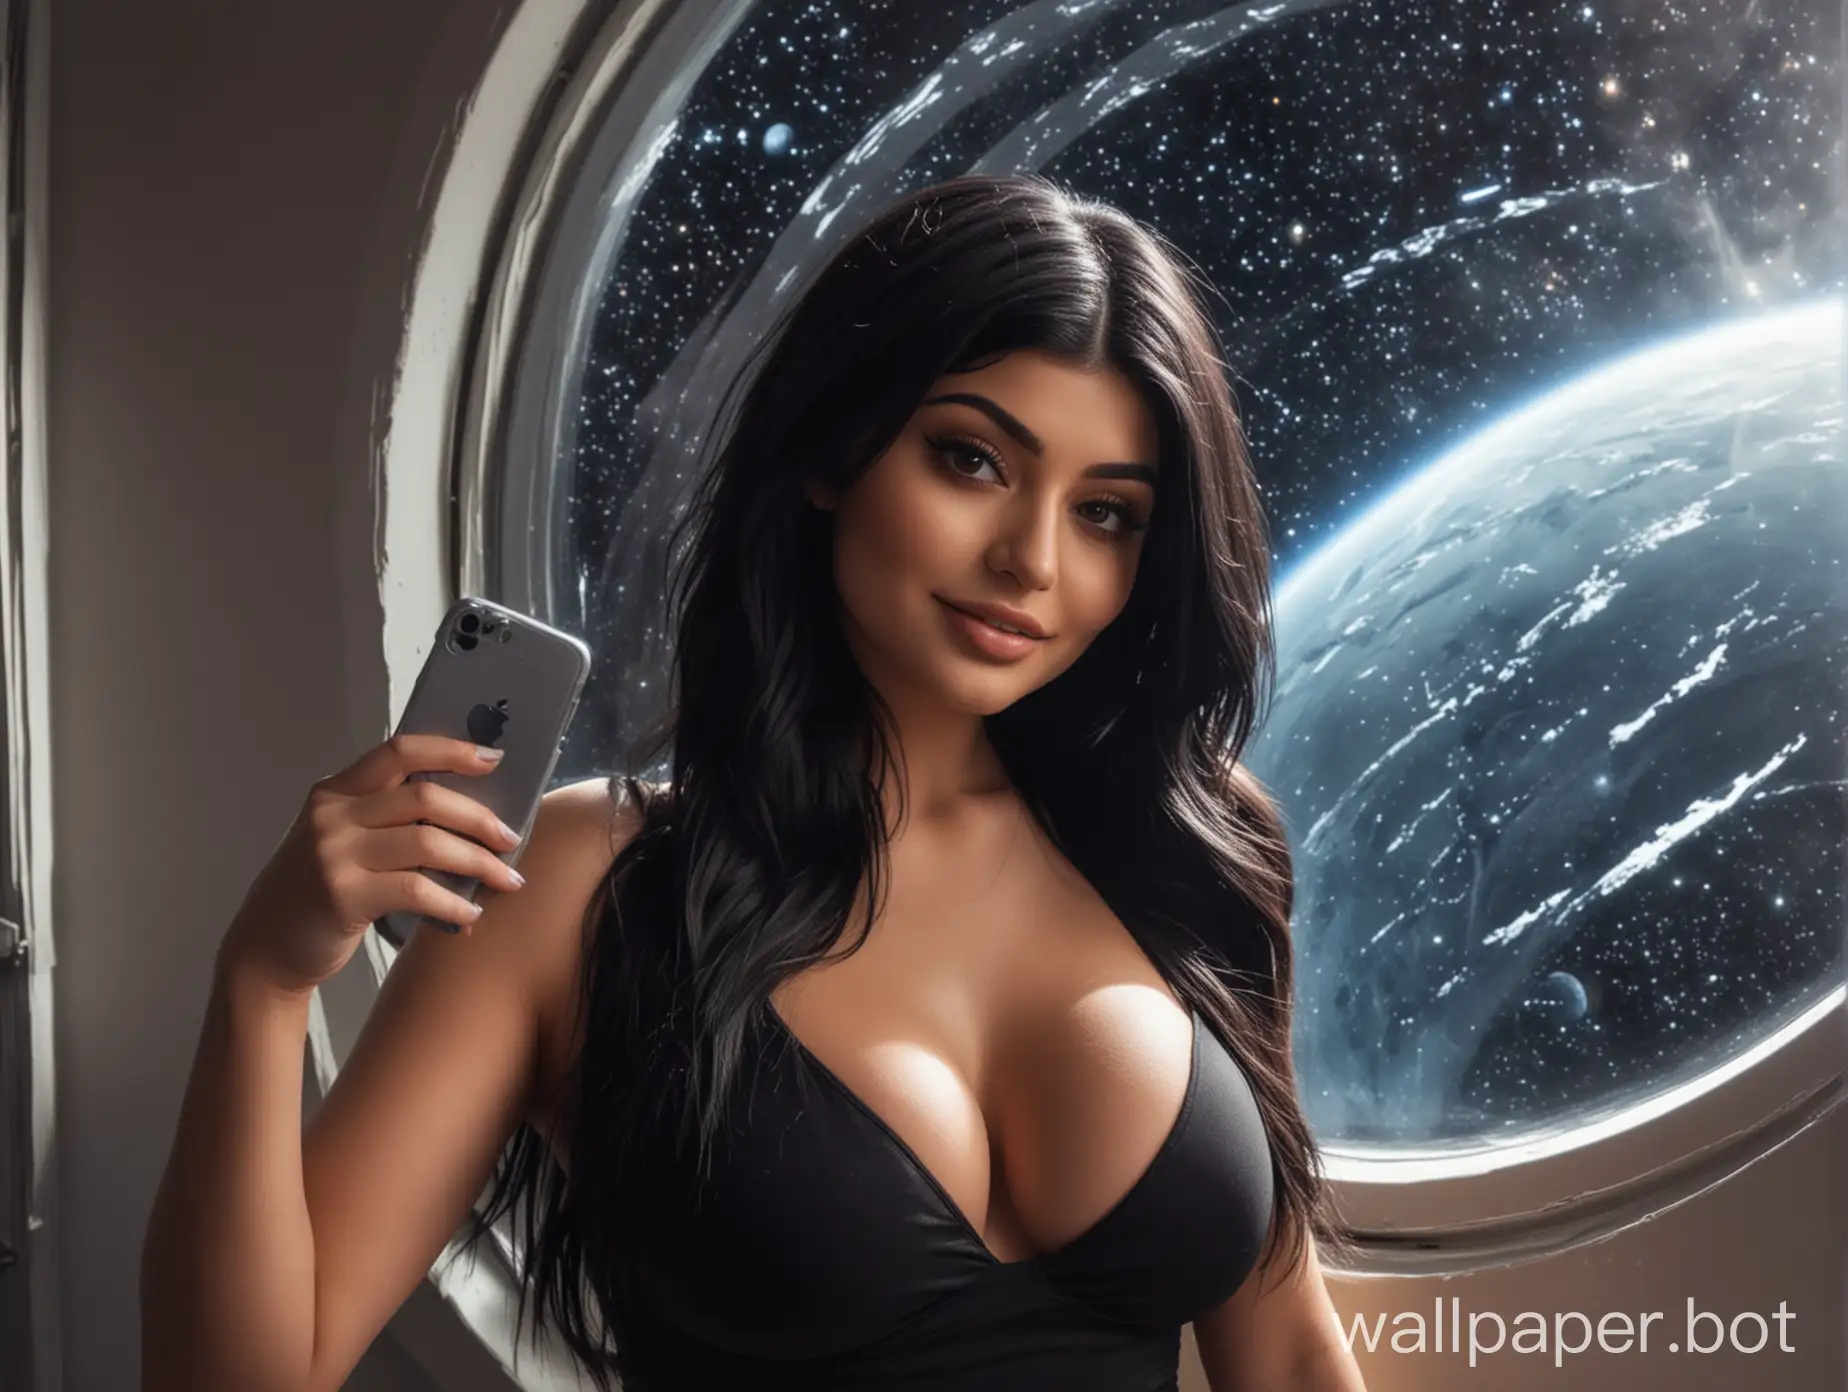 Kylie-Jenner-Capturing-Selfie-in-Futuristic-Space-Setting